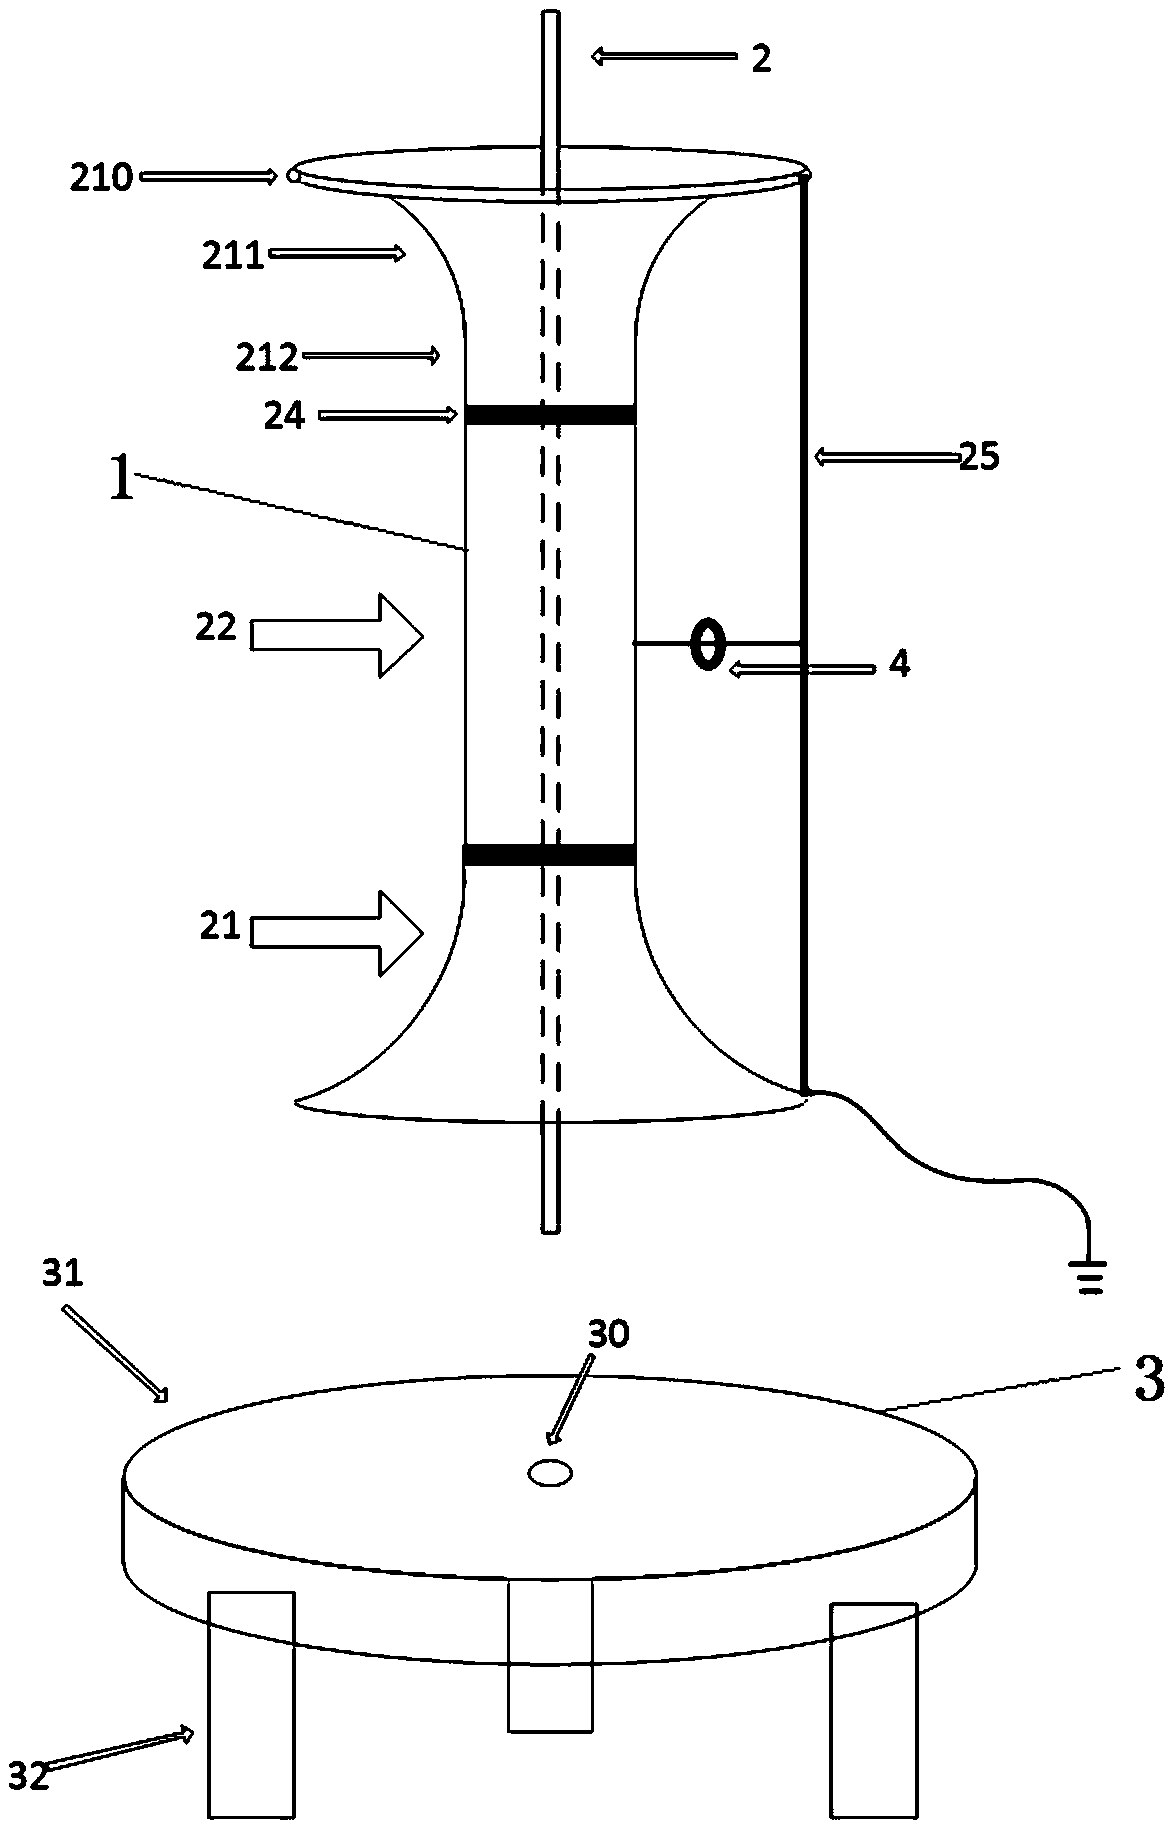 A device and method for observing the impact discharge characteristics of soil around a ground rod